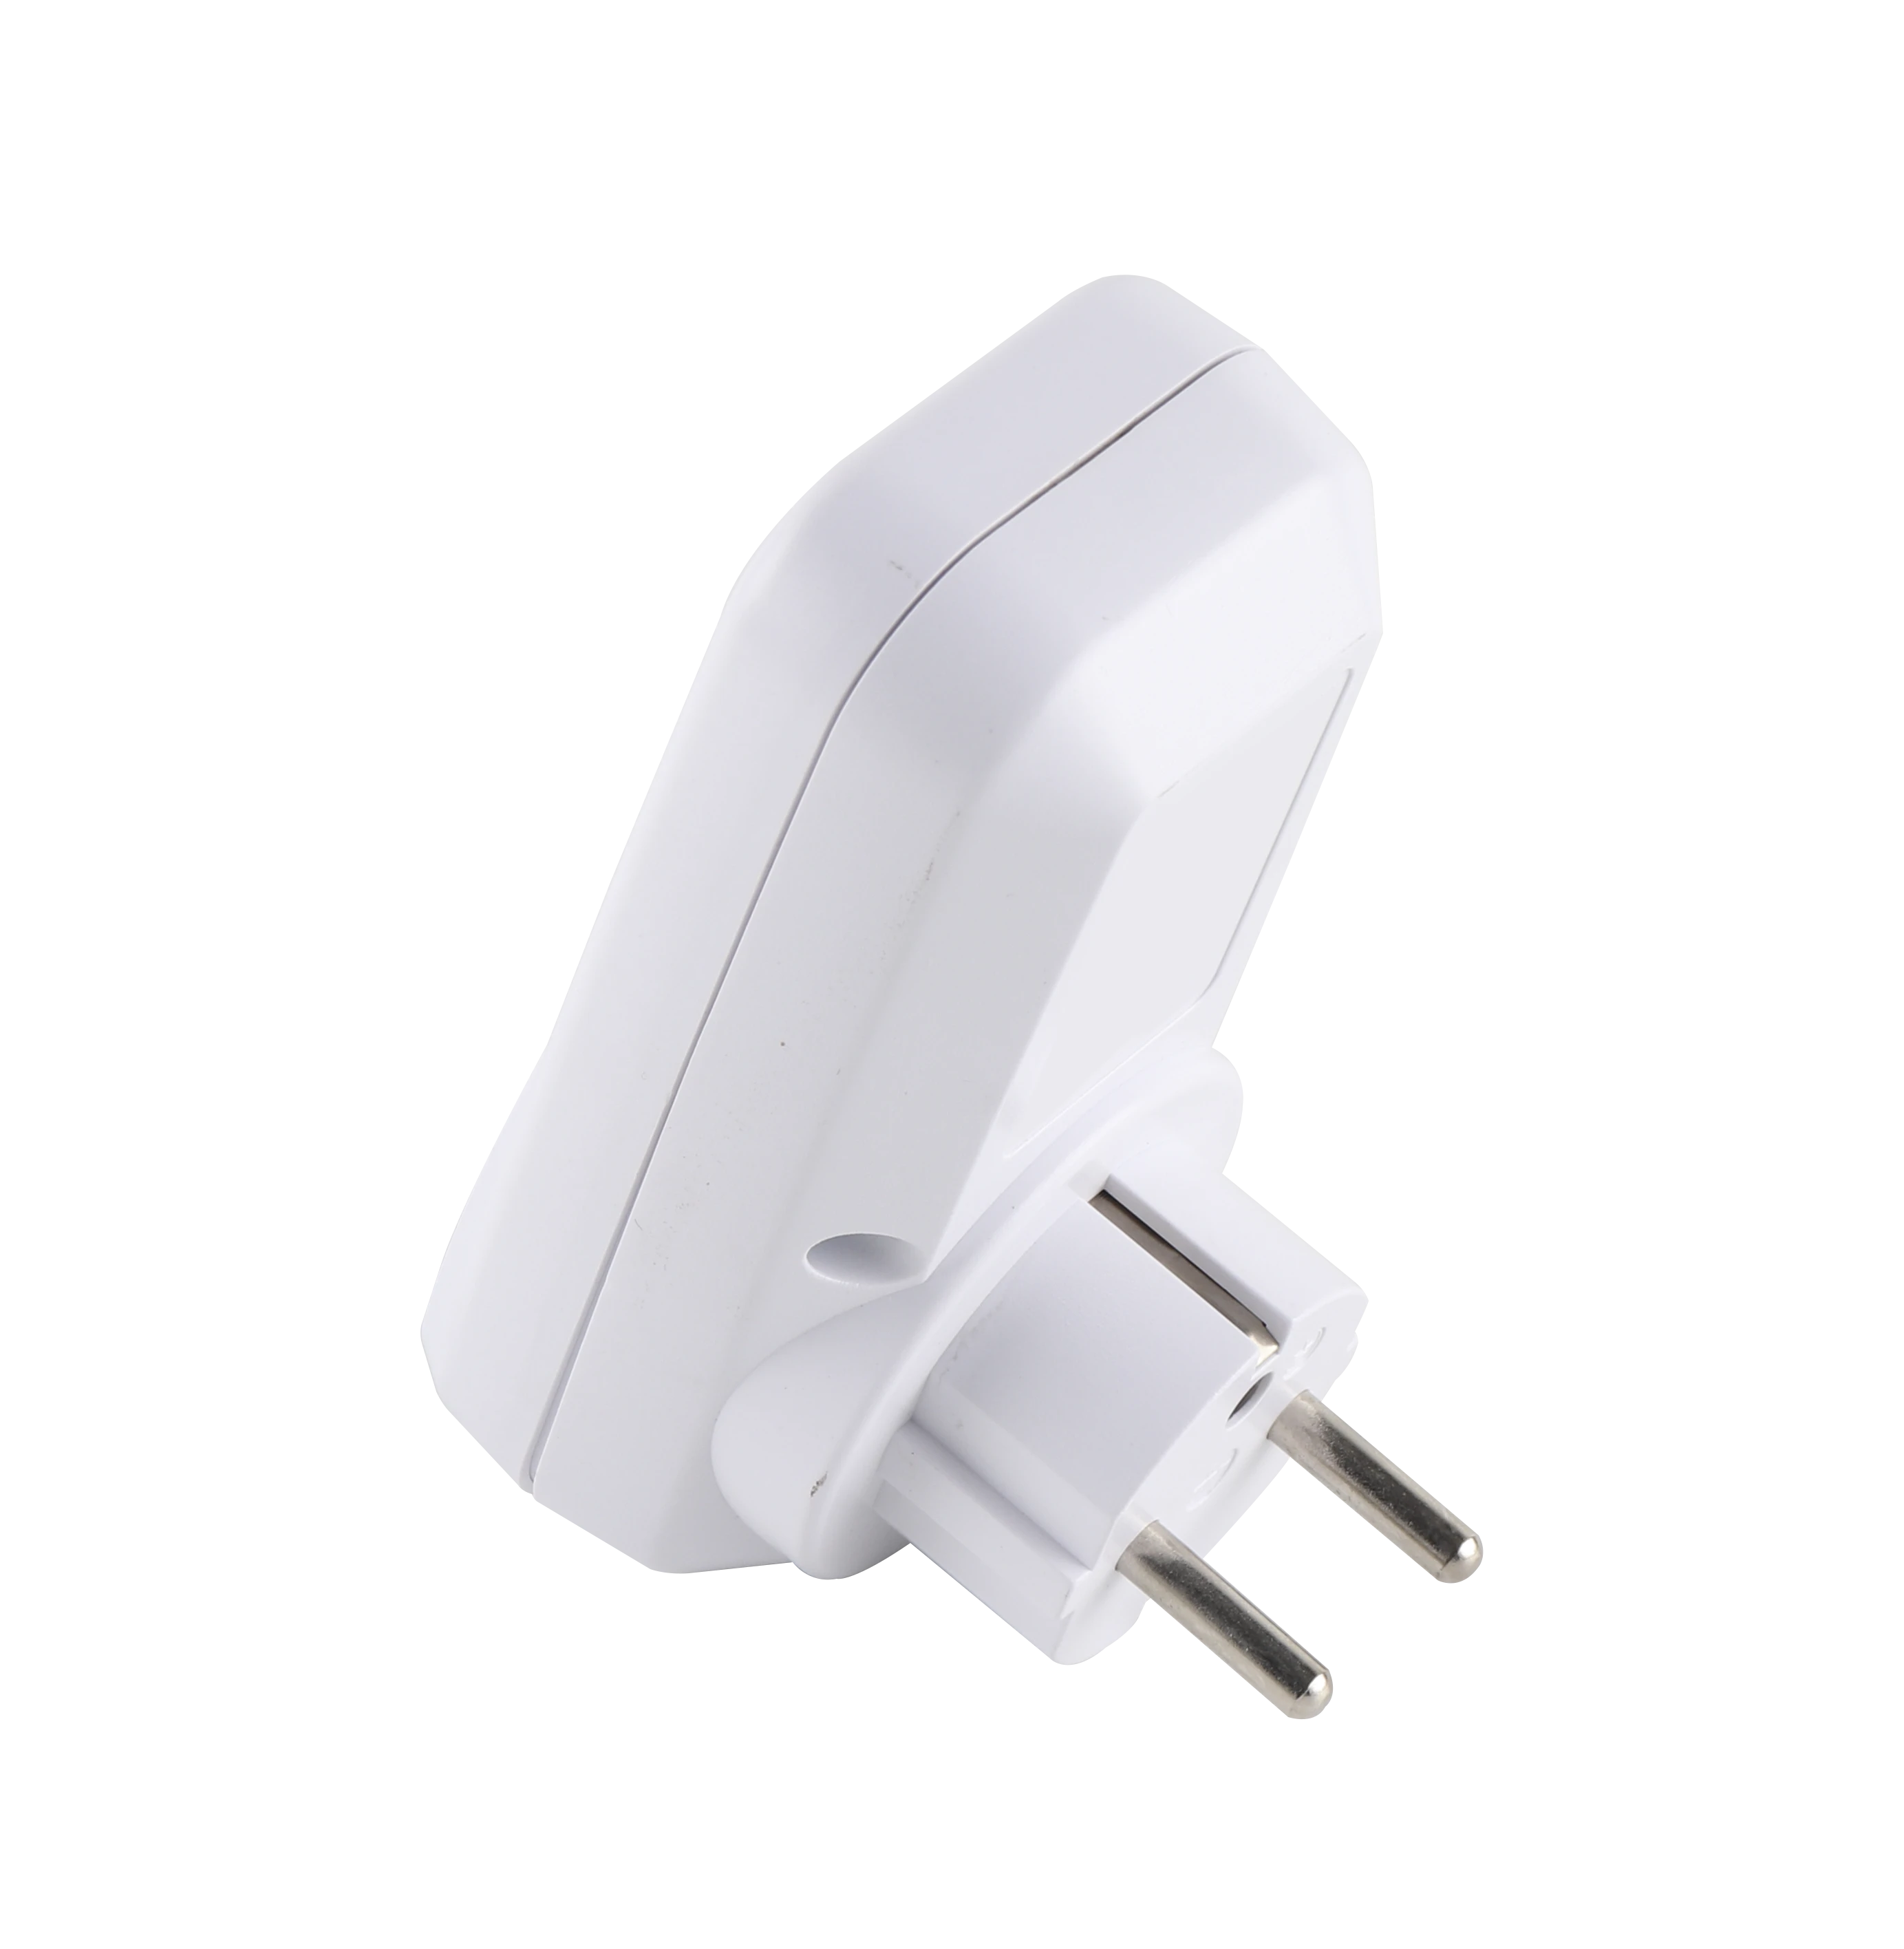 High-quality adjustable low-power power adapter adjustable voltage, current and recovery time voltage surge protector